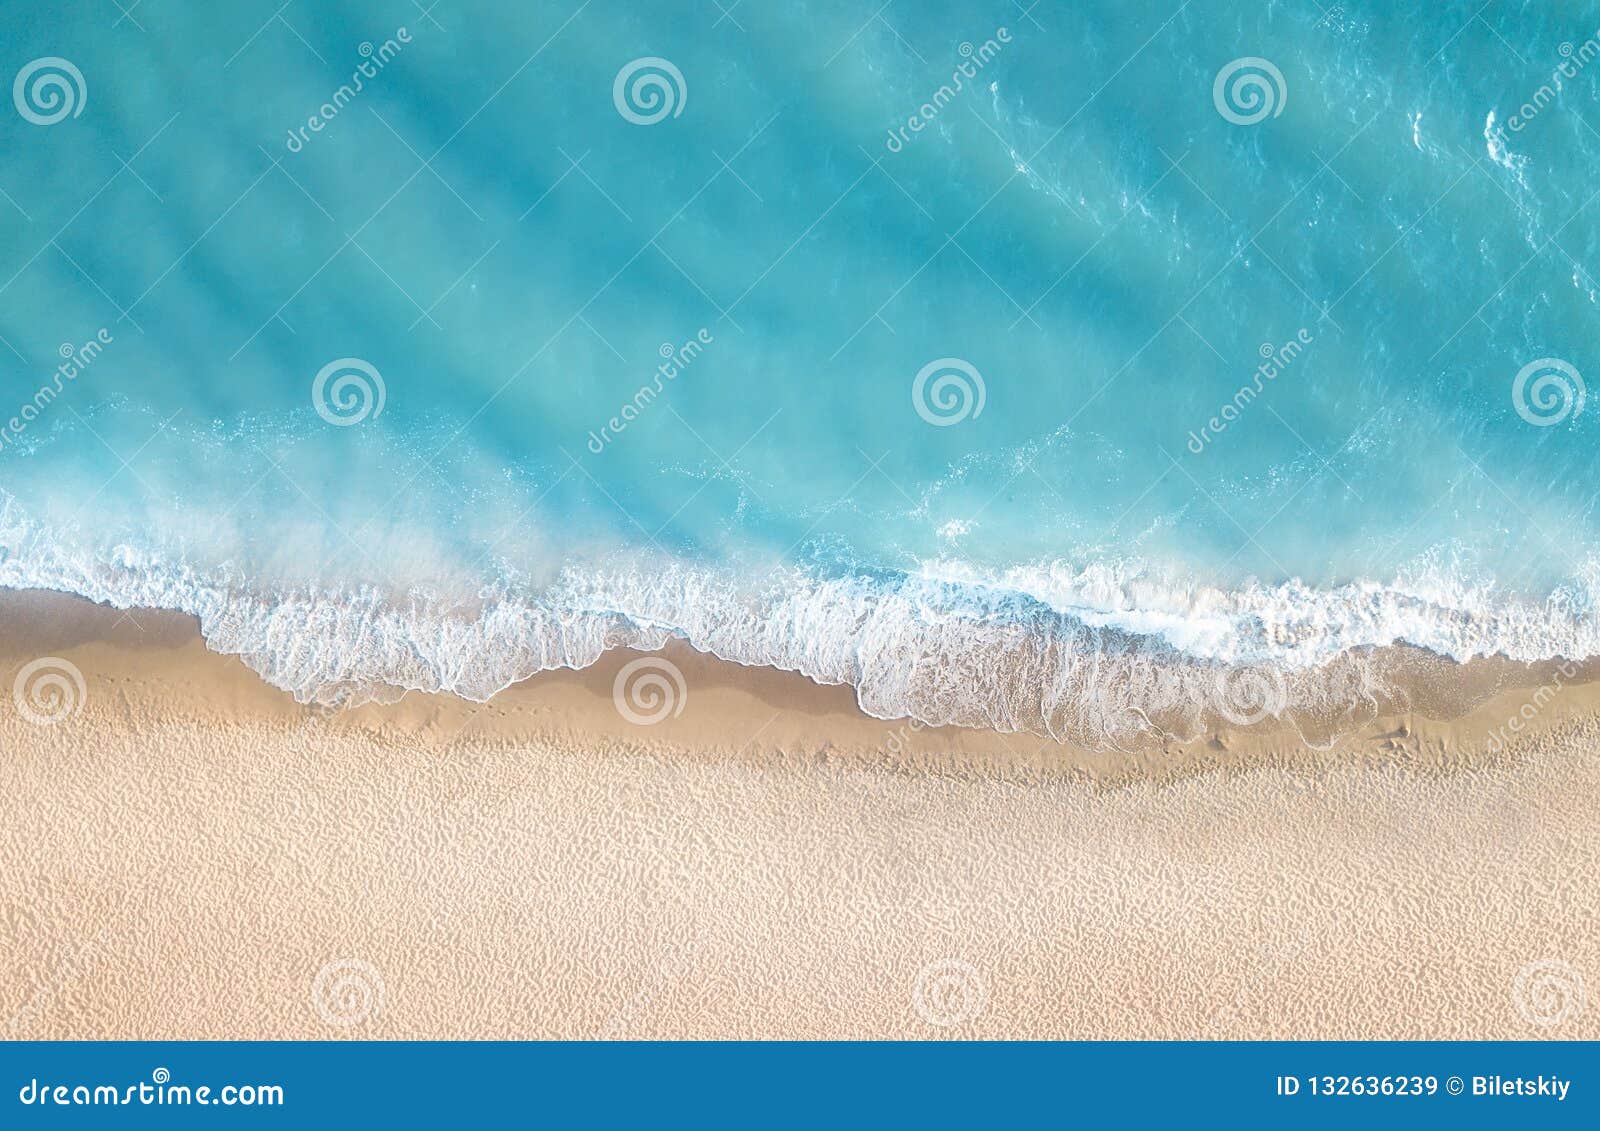 beach and waves from top view. summer seascape from air. top view from drone.